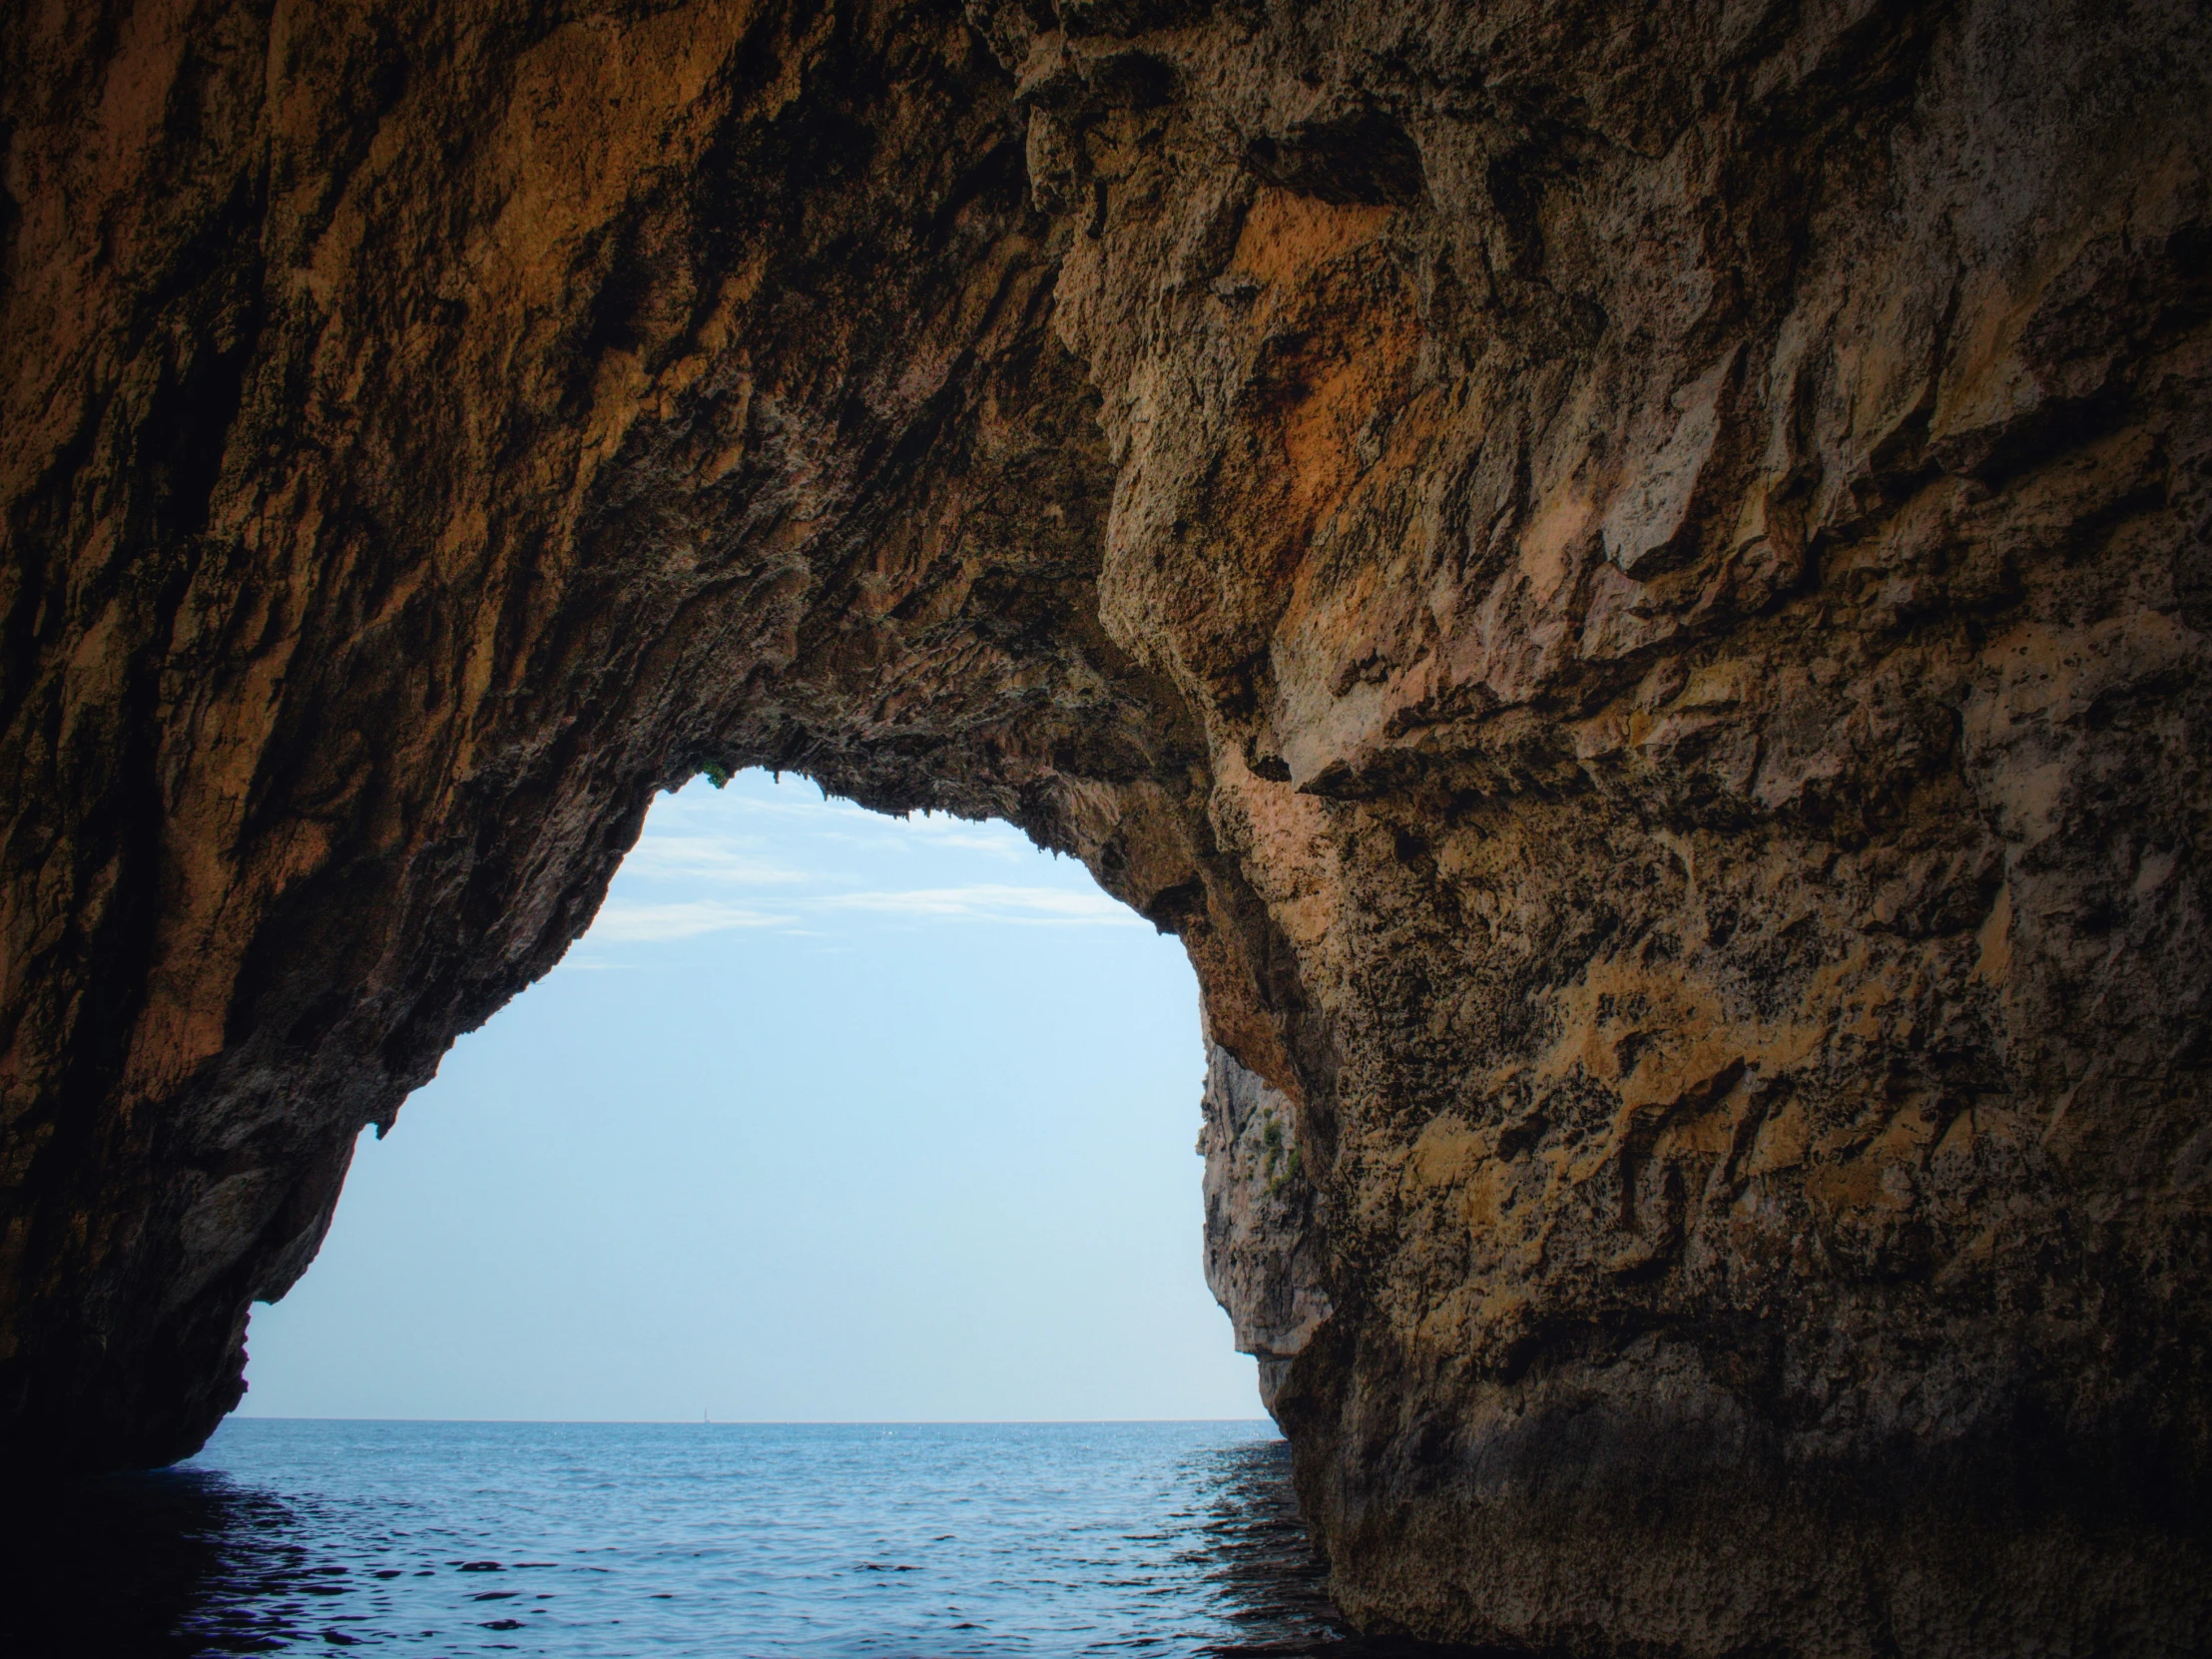 view of the ocean from inside a cave